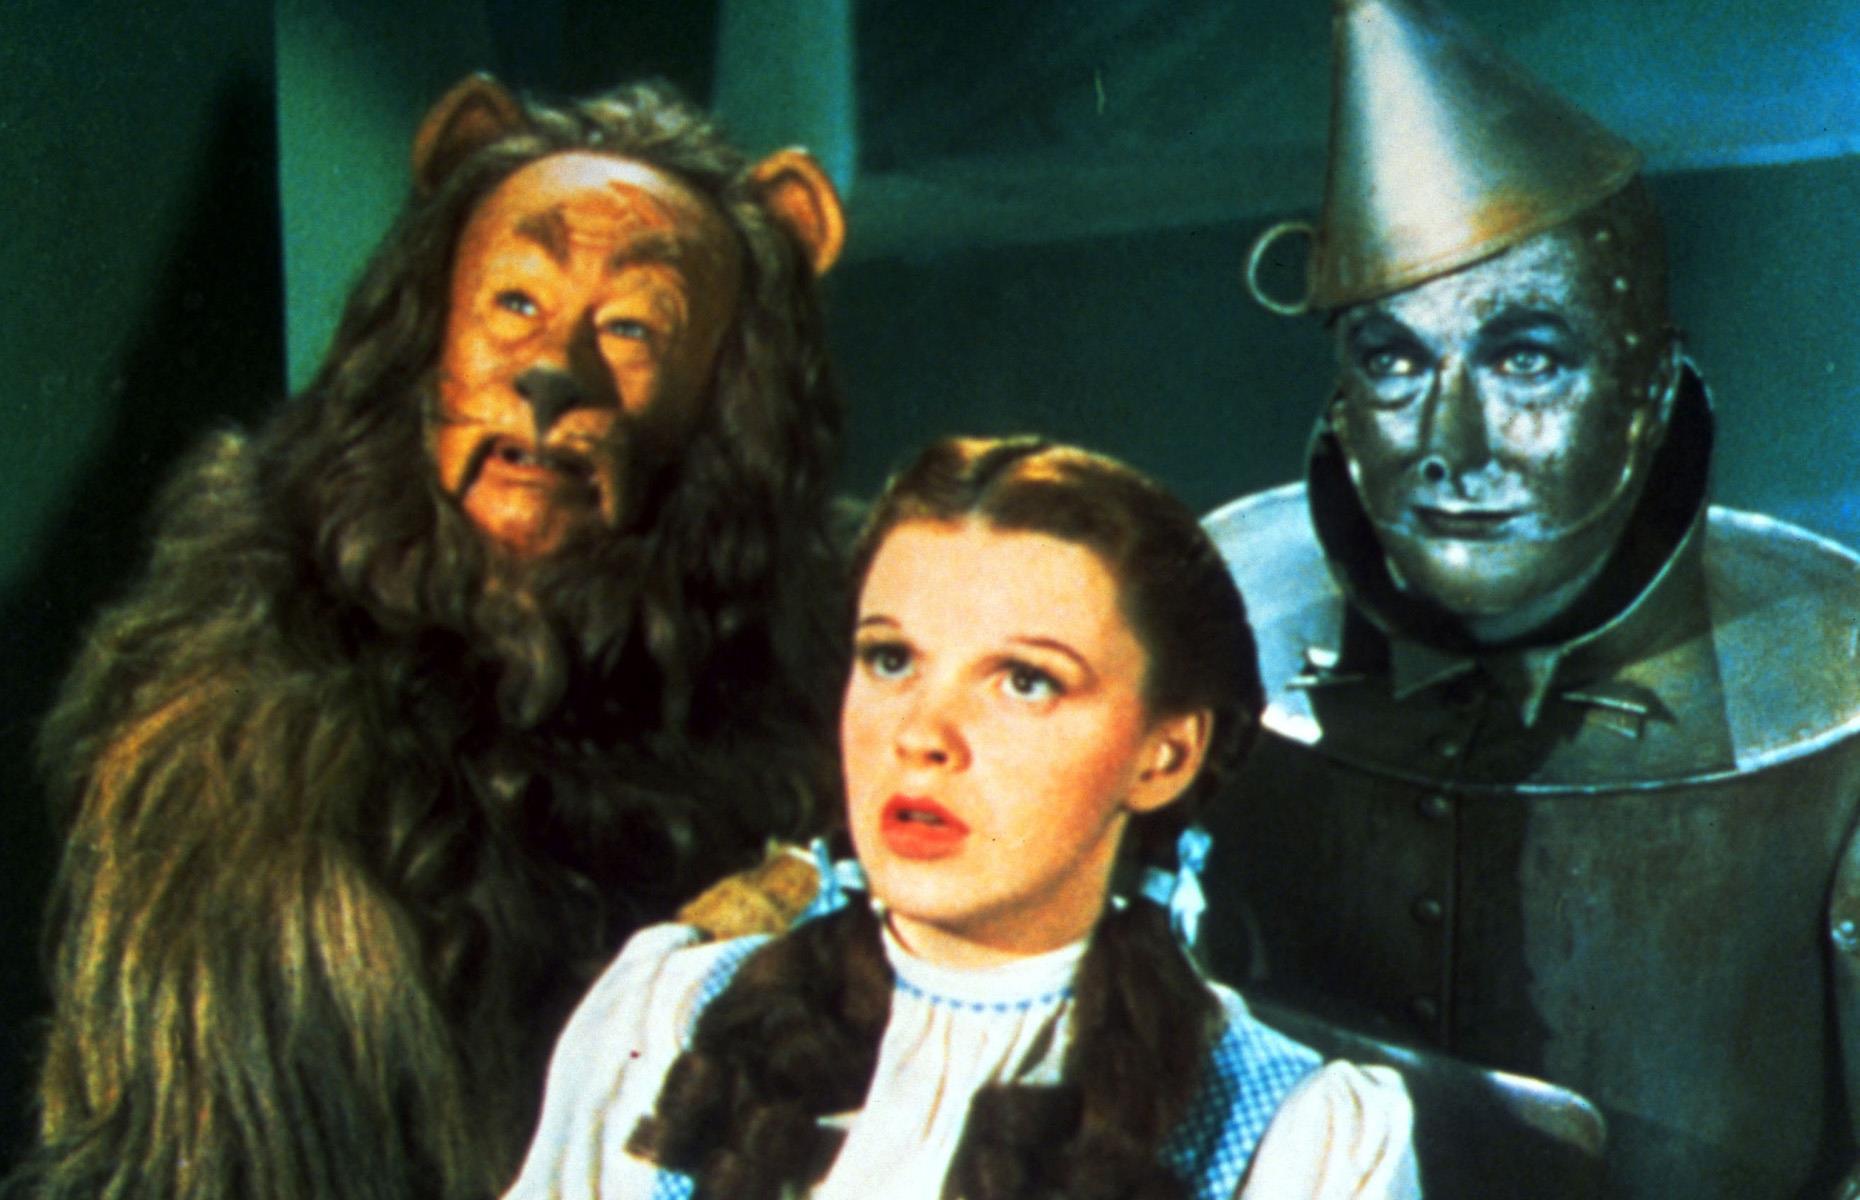 The Wizard of Oz (1939) Cowardly Lion costume: $3 million (£1.9m)